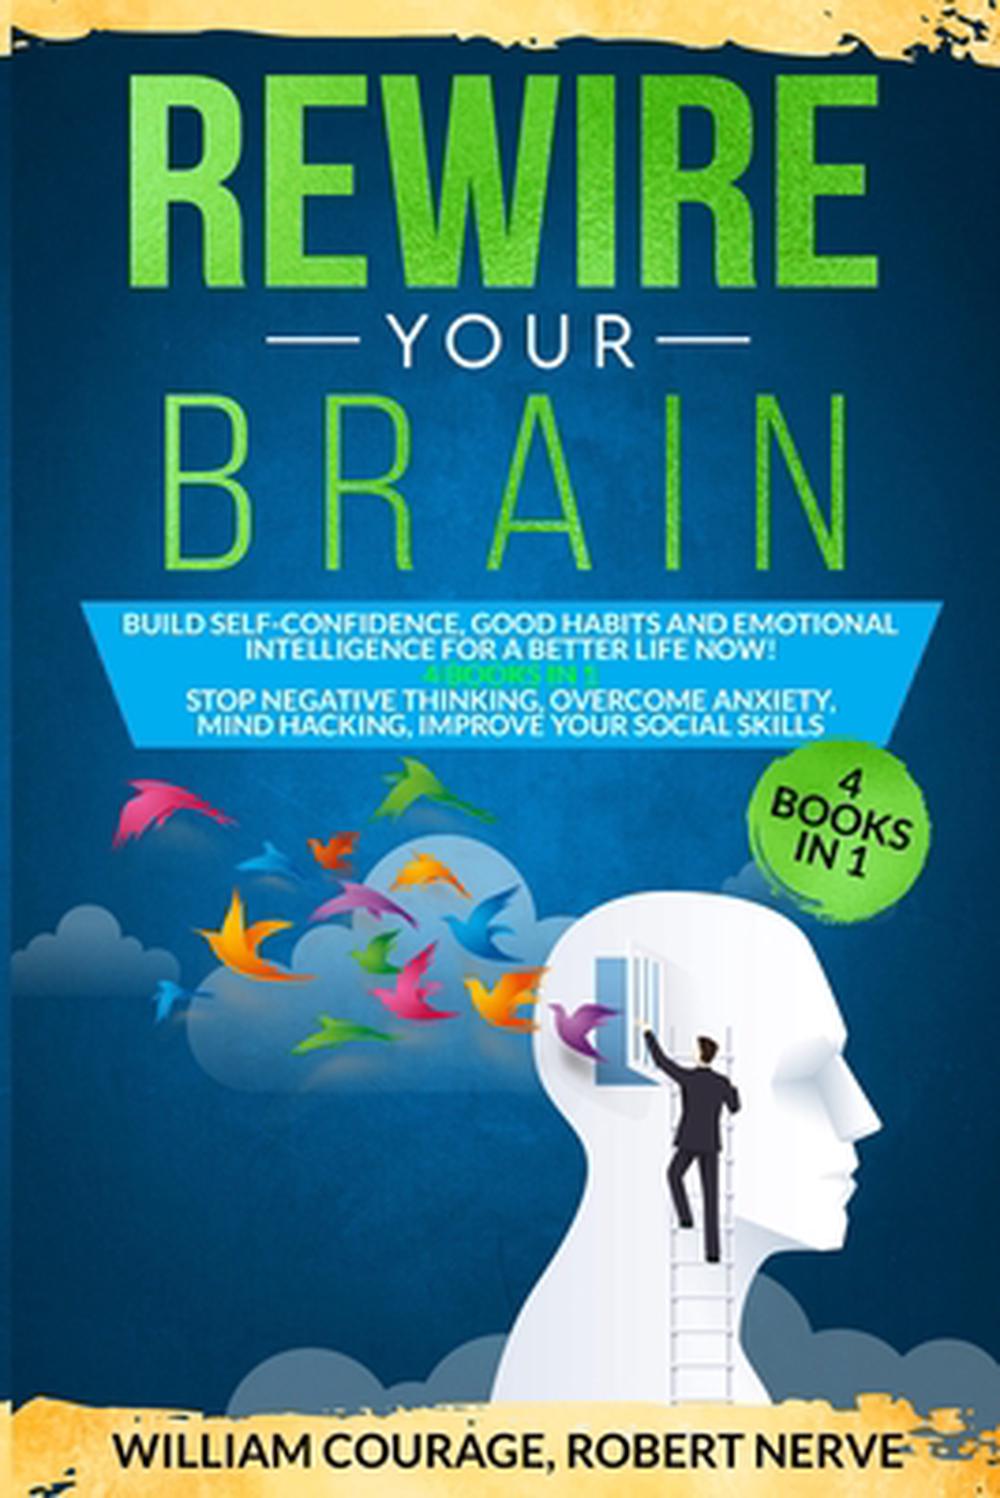 Rewire Your Brain by Courage William Courage (English) Paperback Book ...